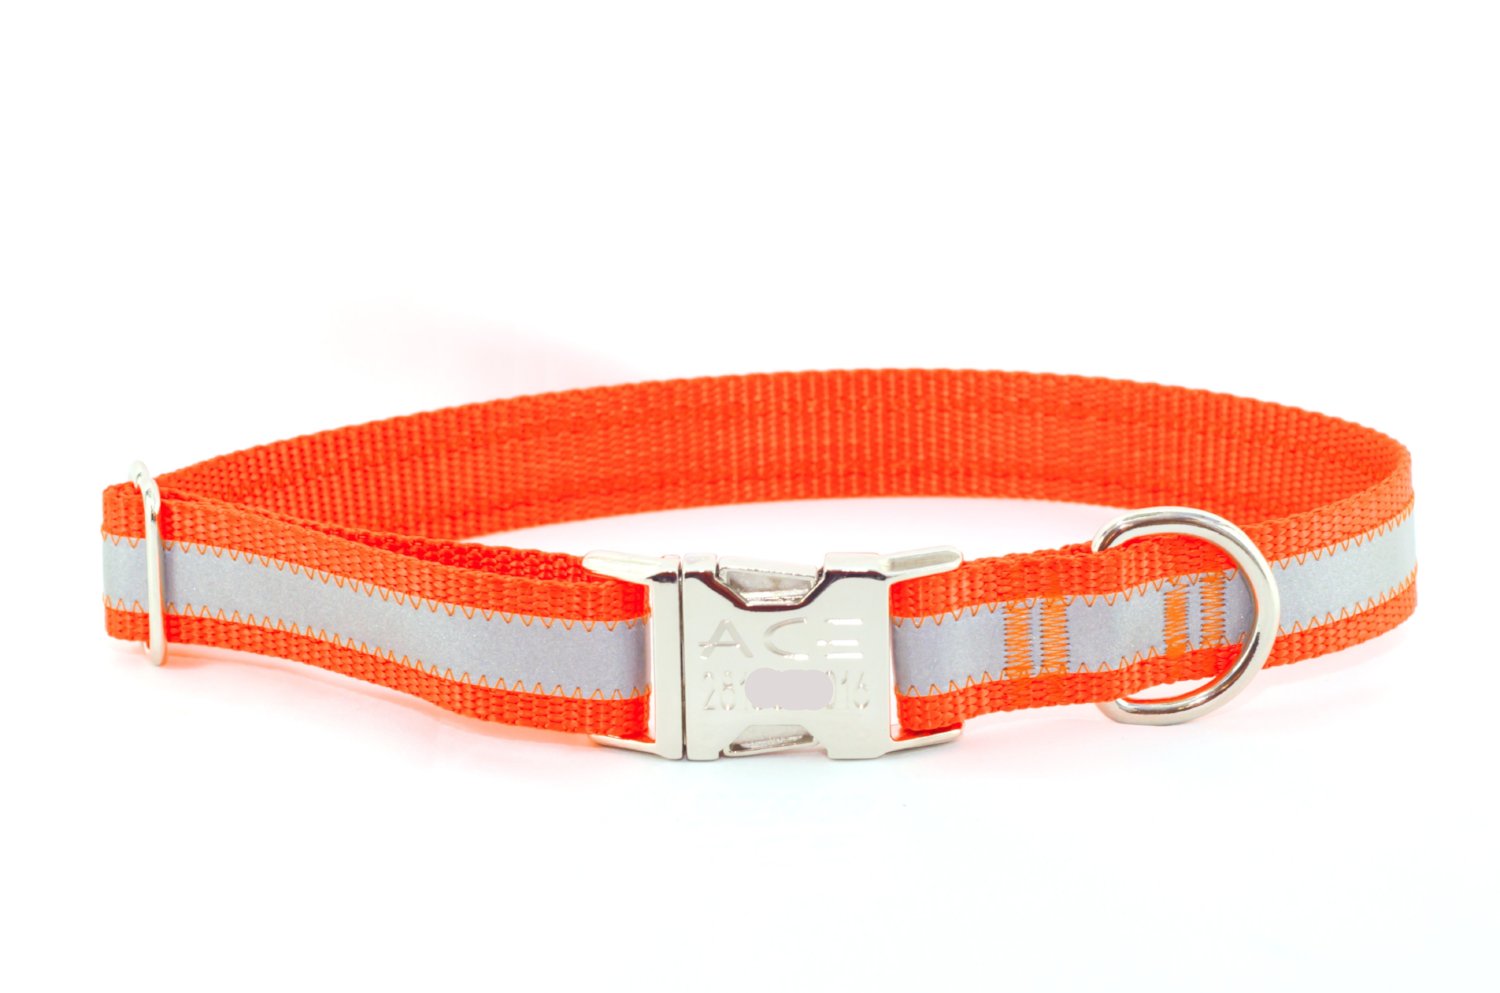 Flat Buckle / Adjustable Side Release Collar | Solid or Reflective | 4 widths! - Fox Valley Pet Wear